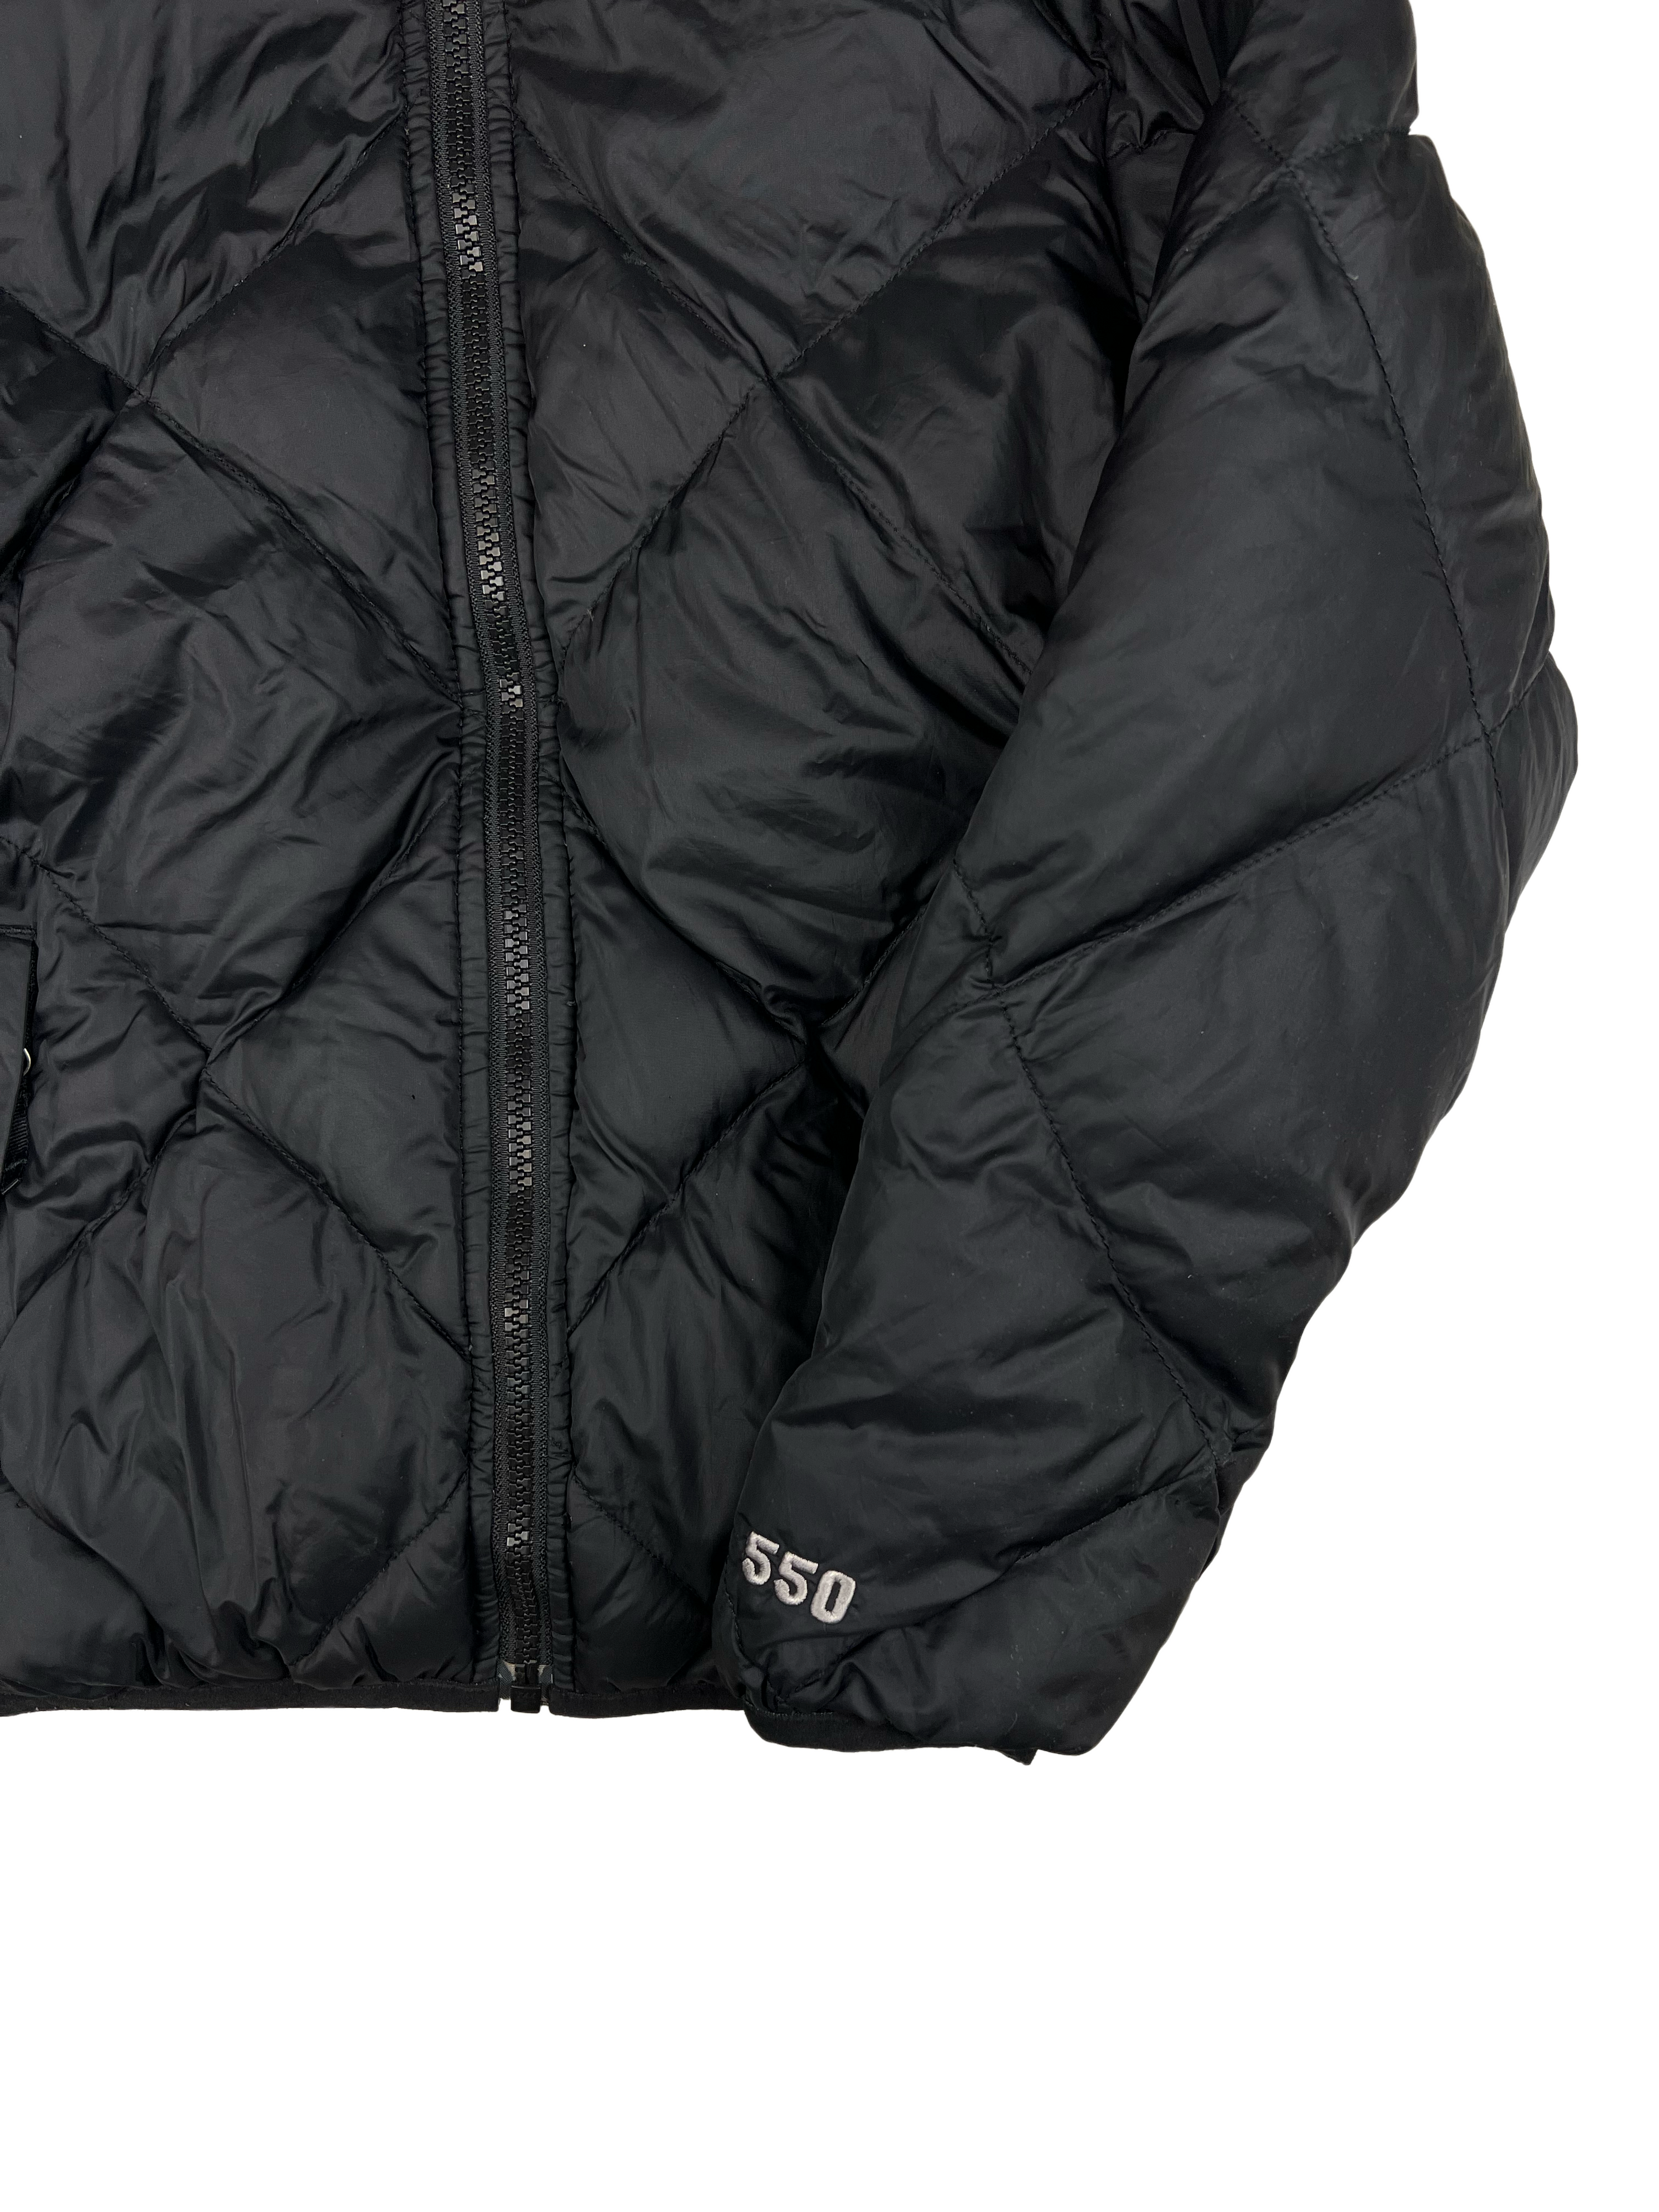 The North Face Nuptse 550 Puffer Jacket 2 in 1 (XS)